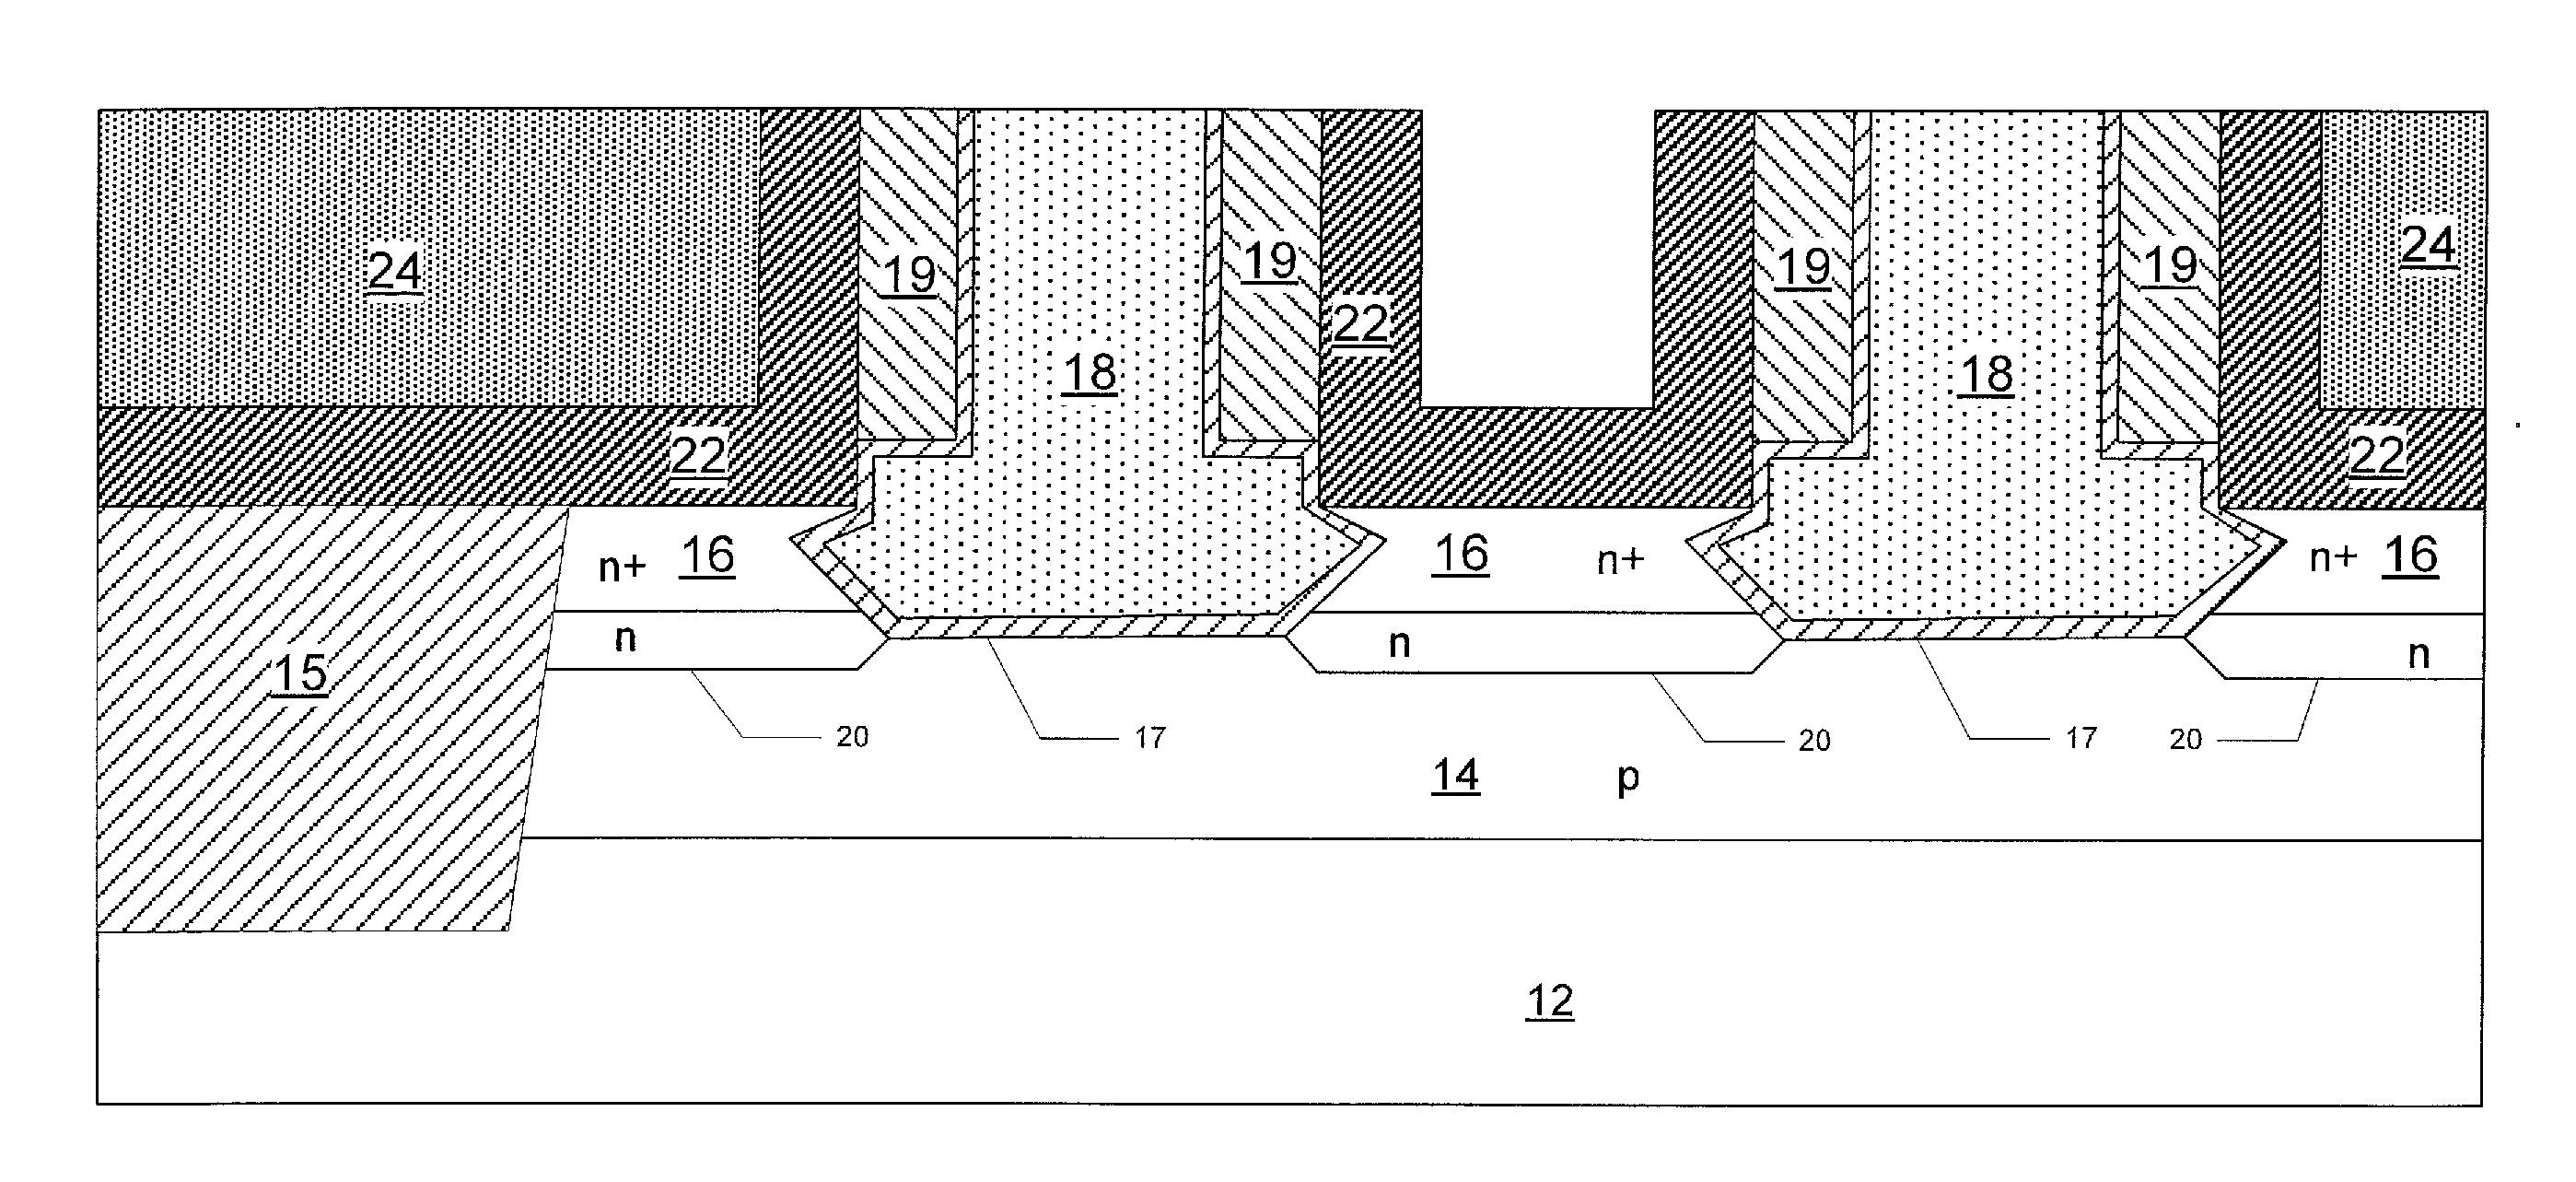 Recessed Channel Insulated-Gate Field Effect Transistor with Self-Aligned Gate and Increased Channel Length